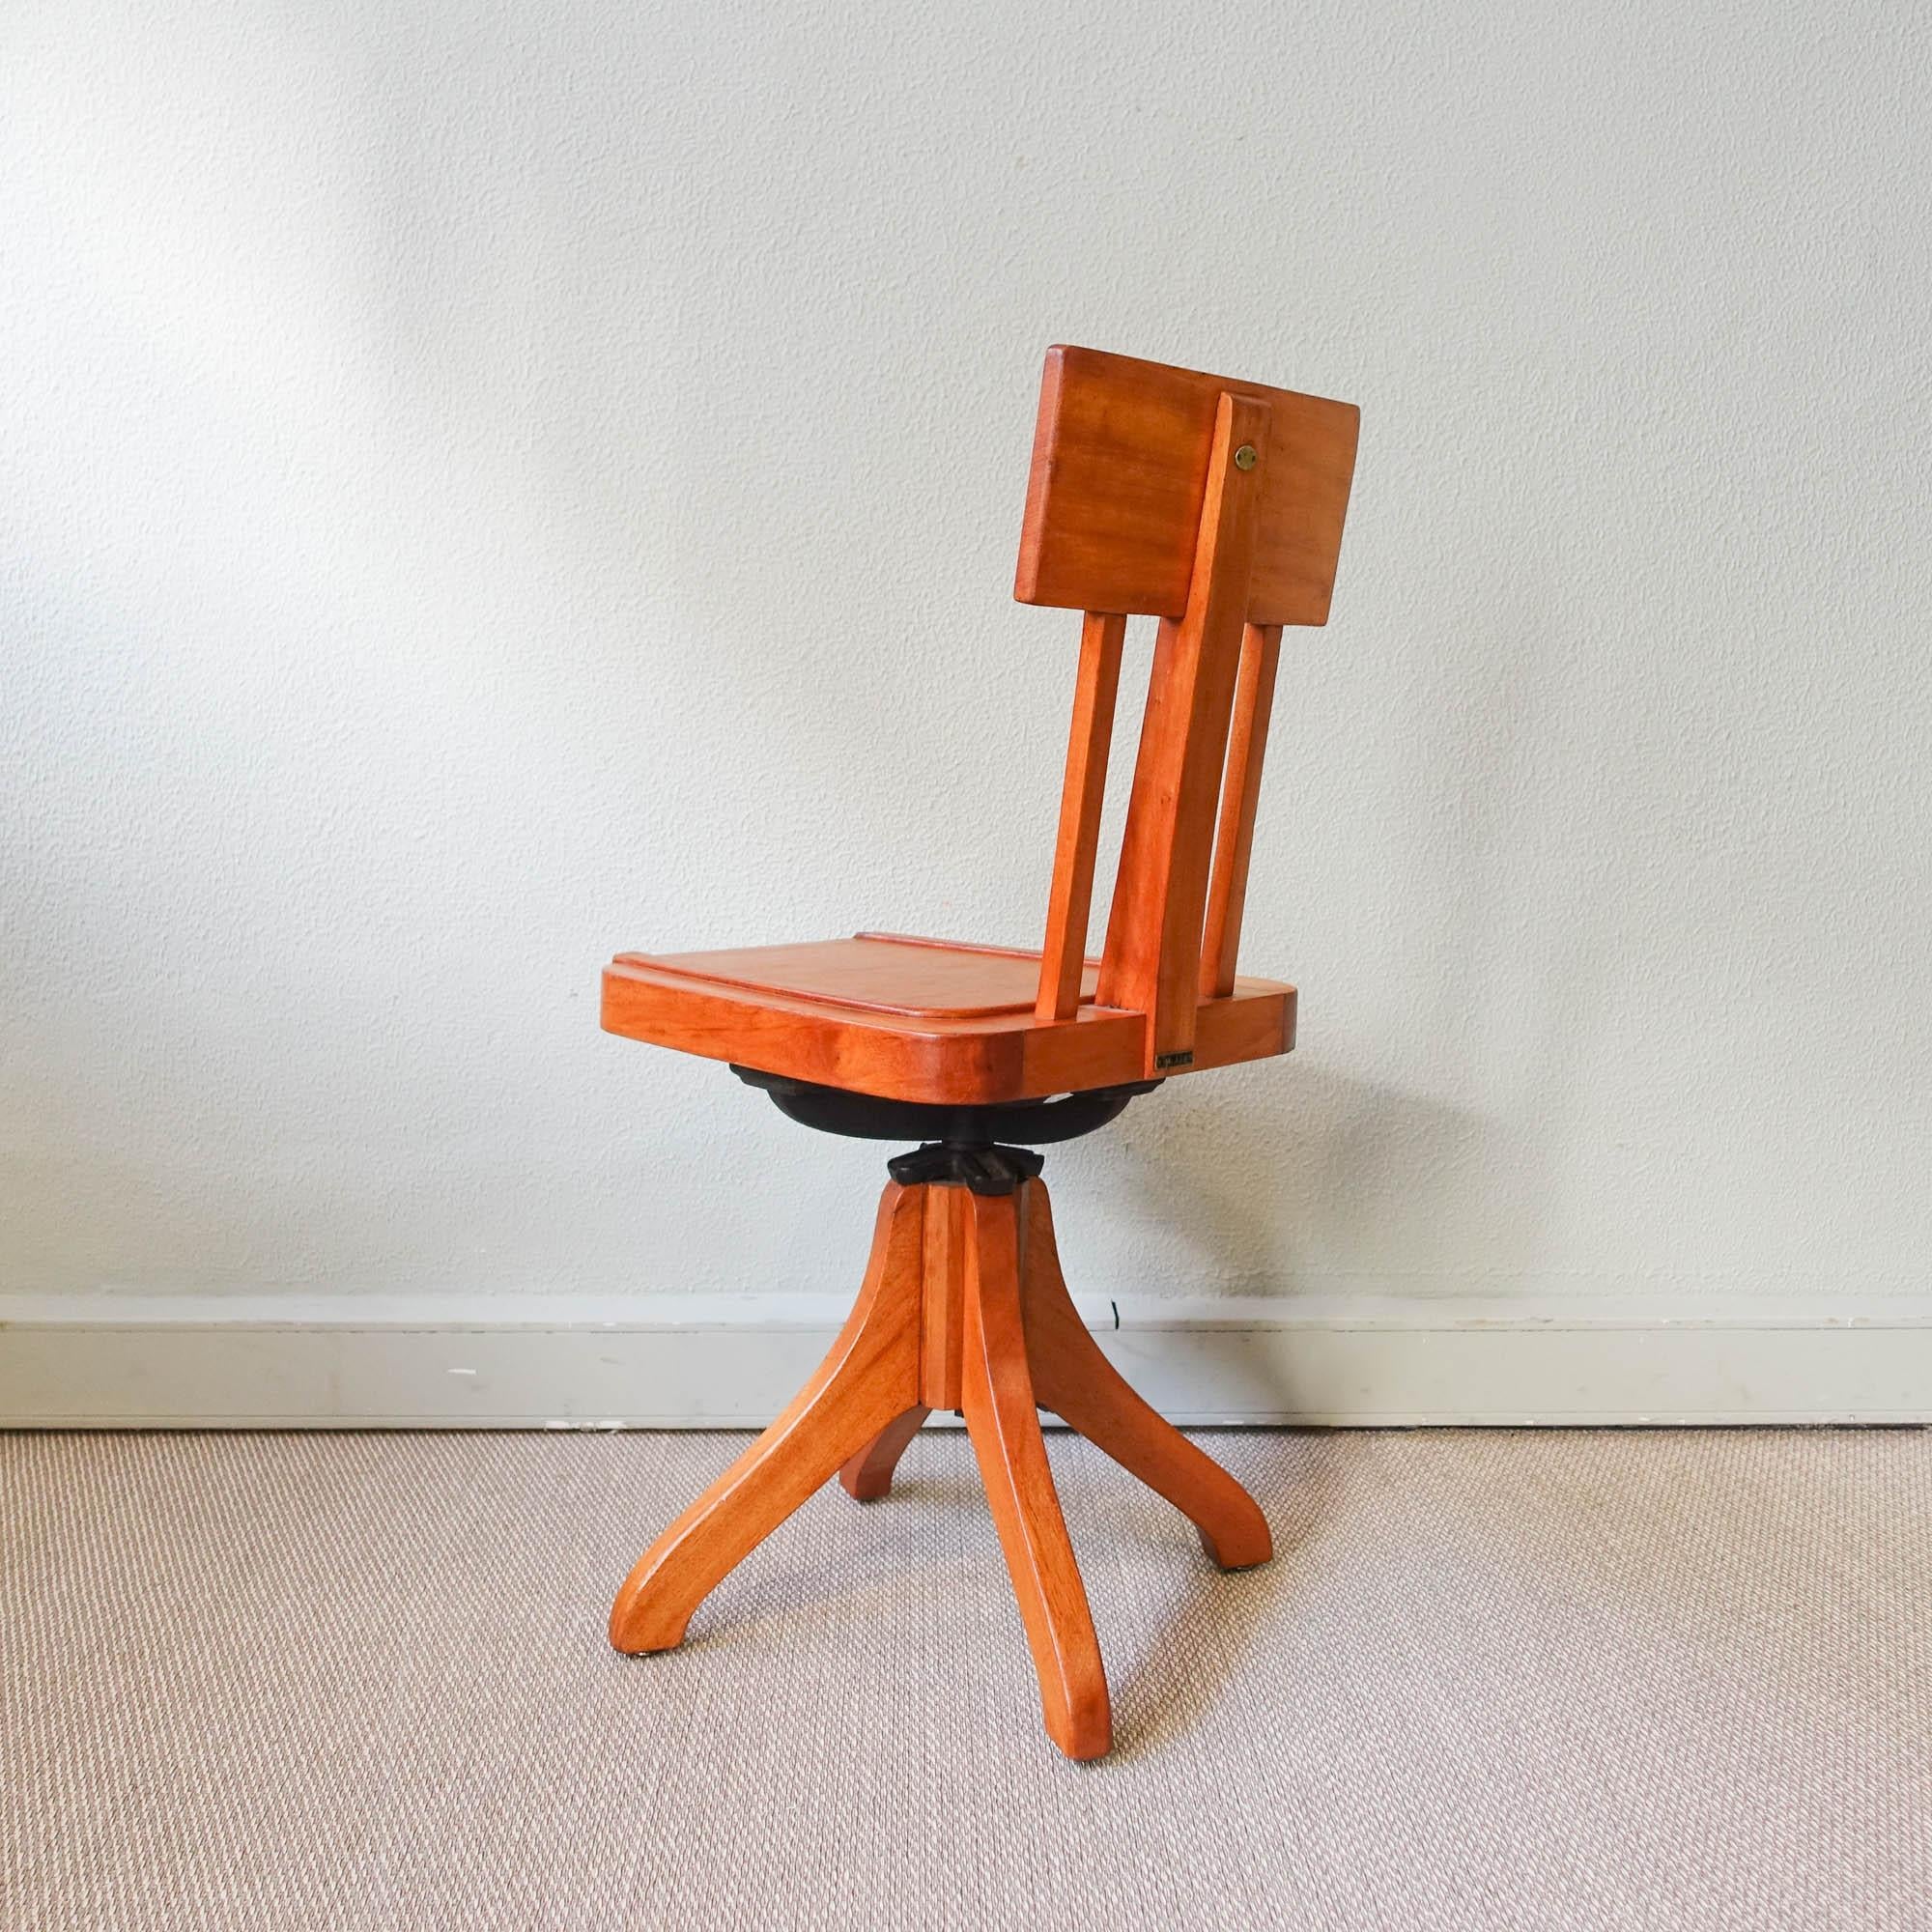 Mid-Century Modern Typist Chair, Model Simples, by Móveis Olaio, 1940's For Sale